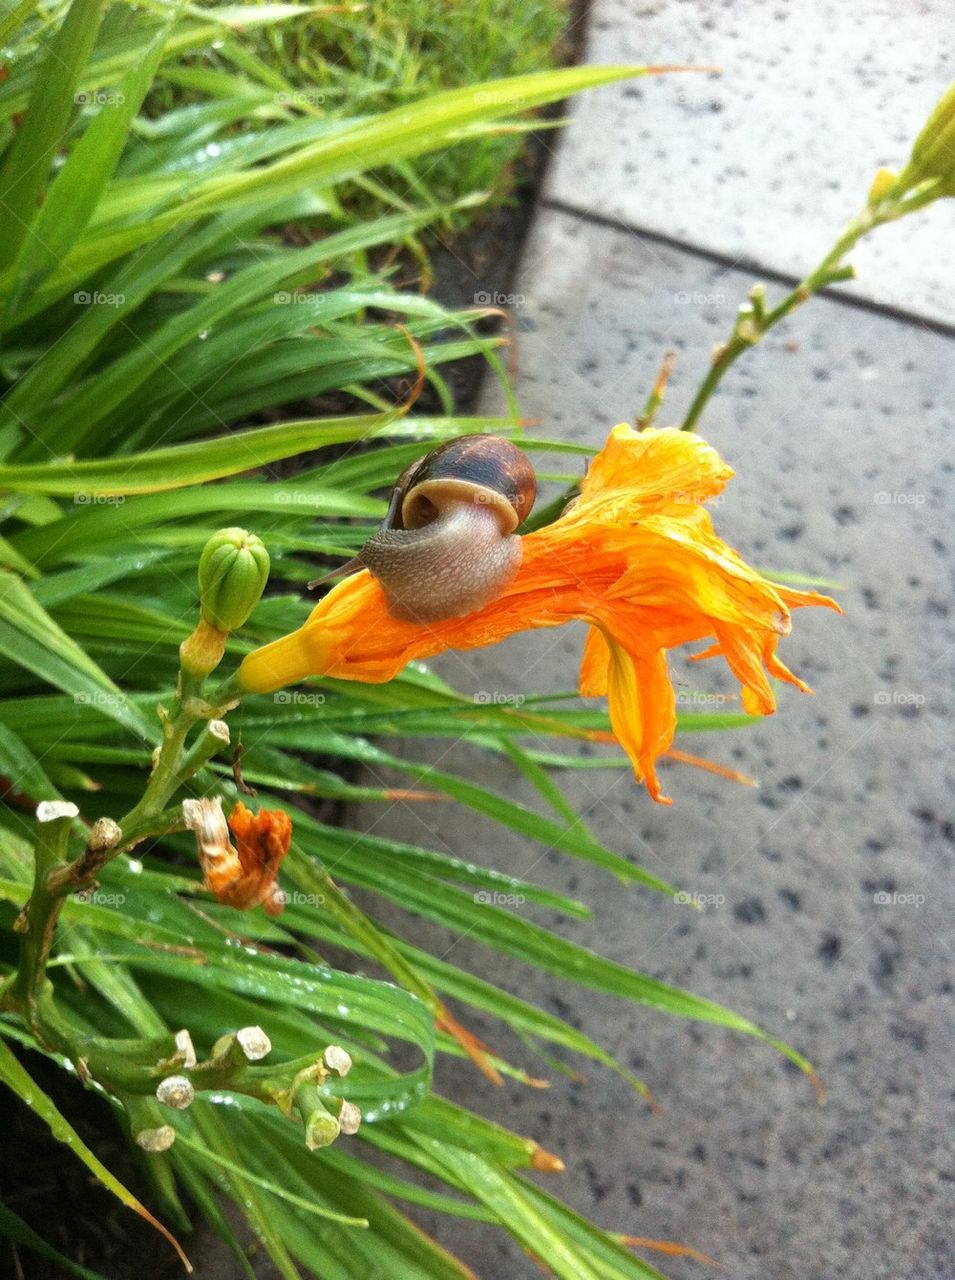 Rise and shine snail. On my morning walk I saw this snail crawling on a flower.